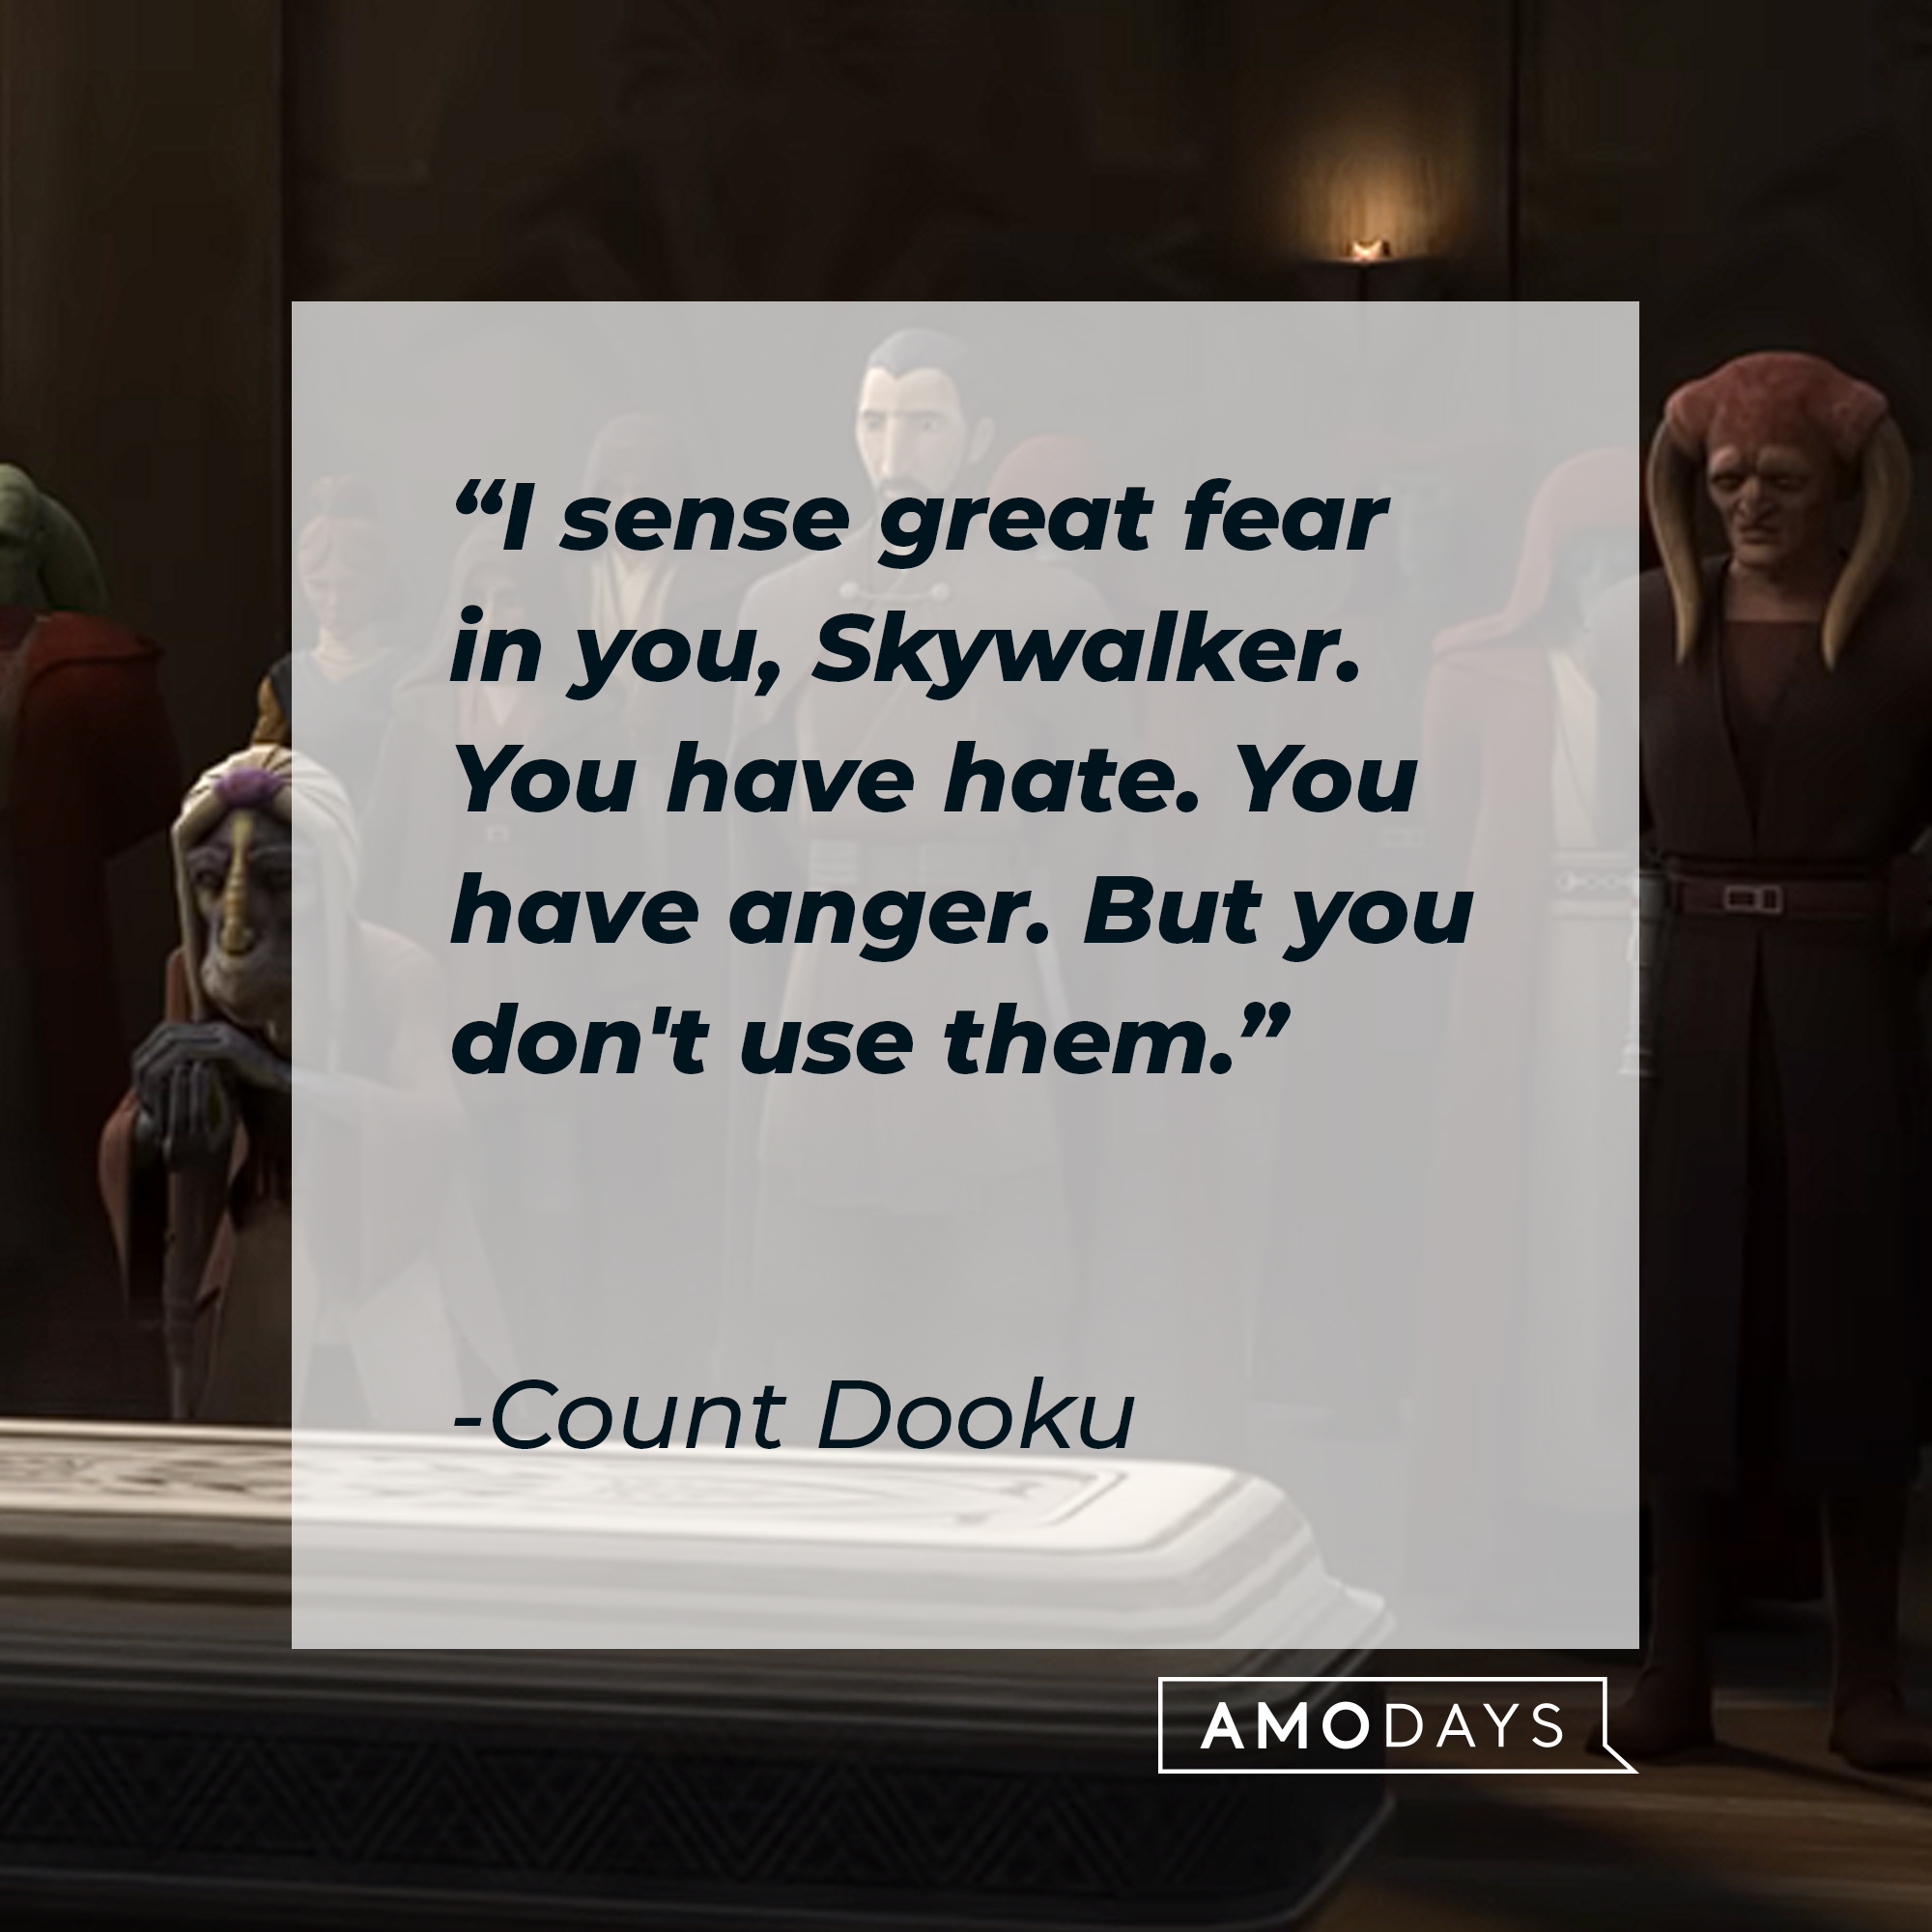 Count Dooku's quote: "I sense great fear in you, Skywalker. You have hate. You have anger. But you don't use them." | Source: youtube.com/StarWars